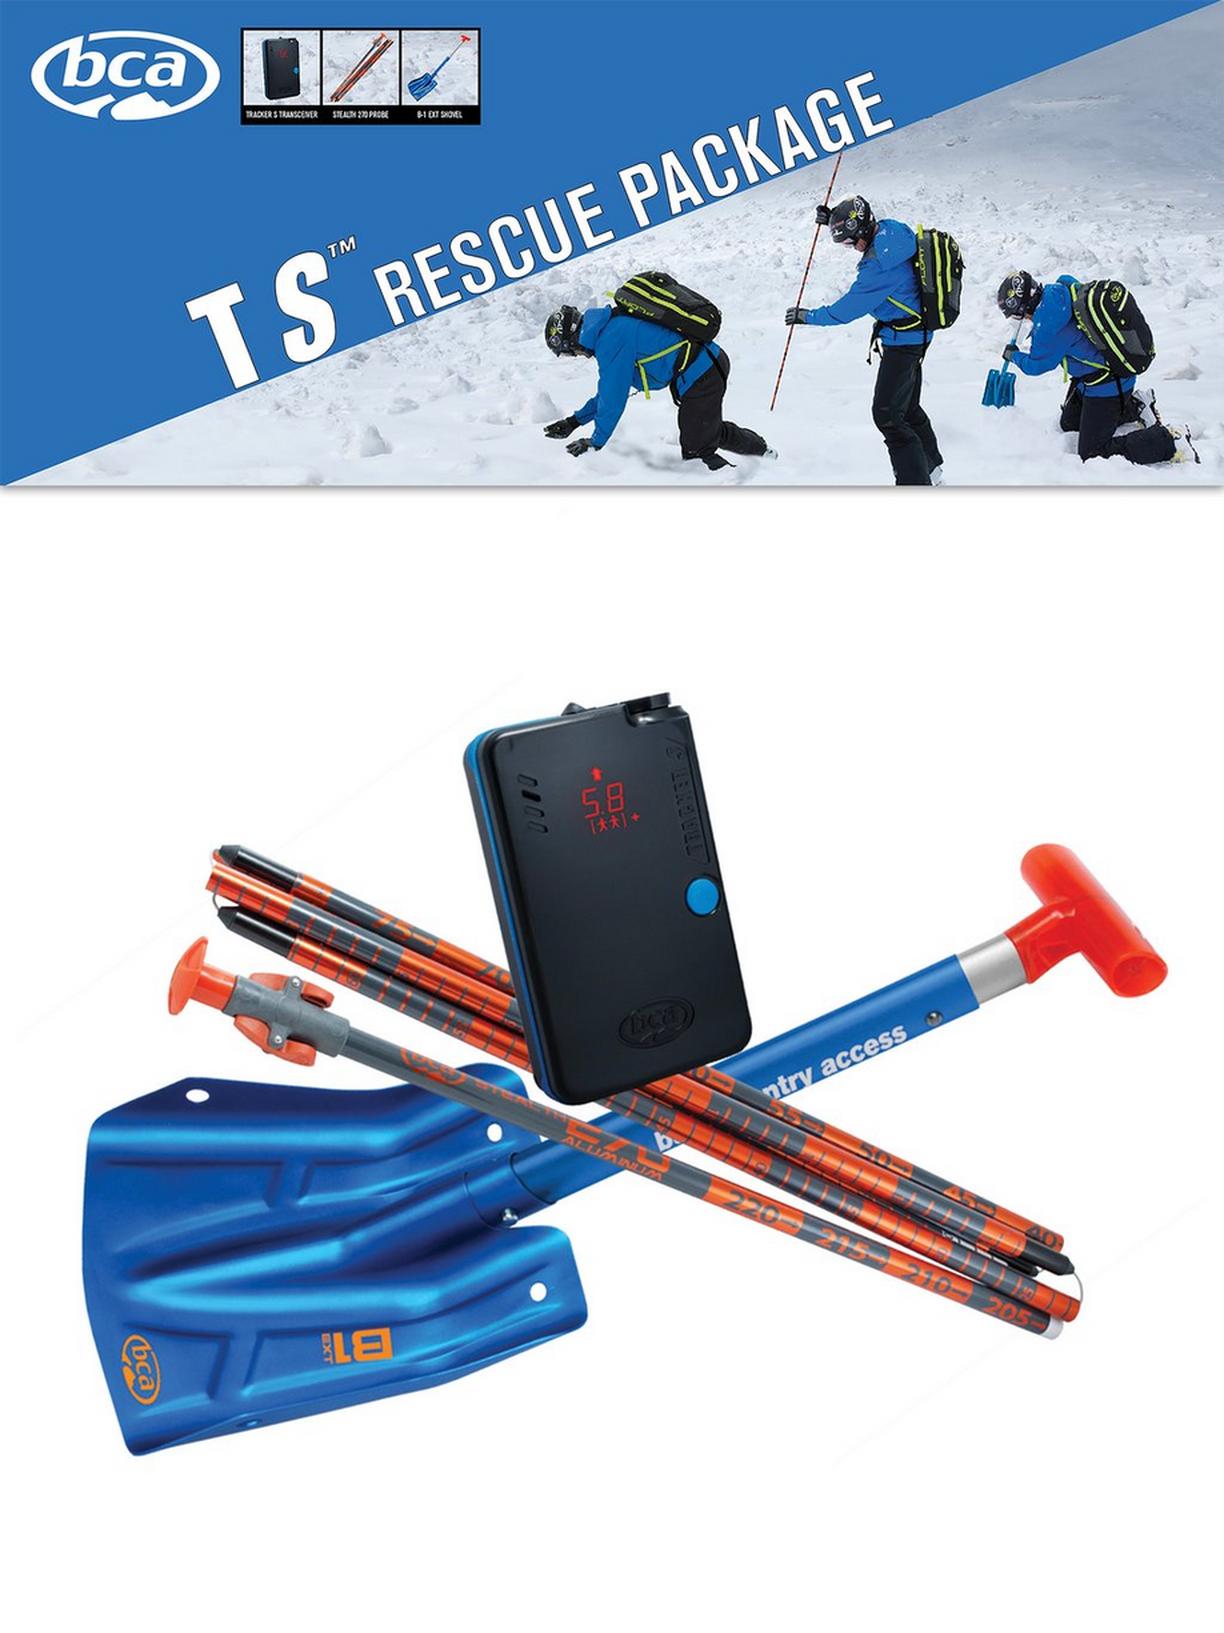 T S AVALANCHE RESCUE PACKAGE